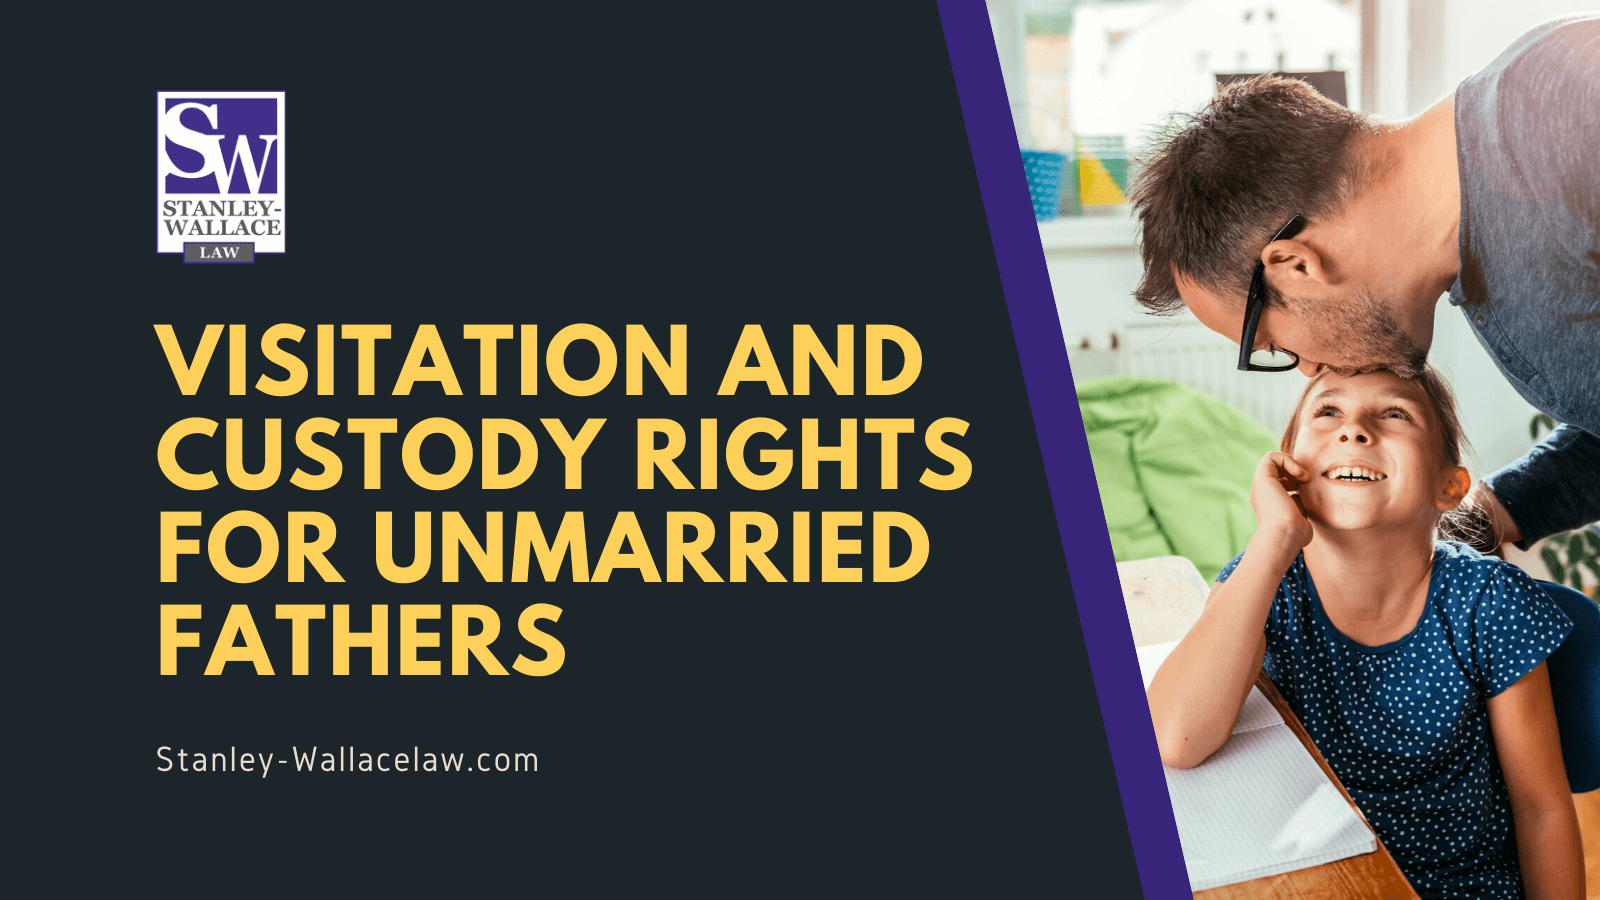 Visitation and Custody Rights for Unmarried Fathers - Stanley-Wallace Law - slidell louisiana